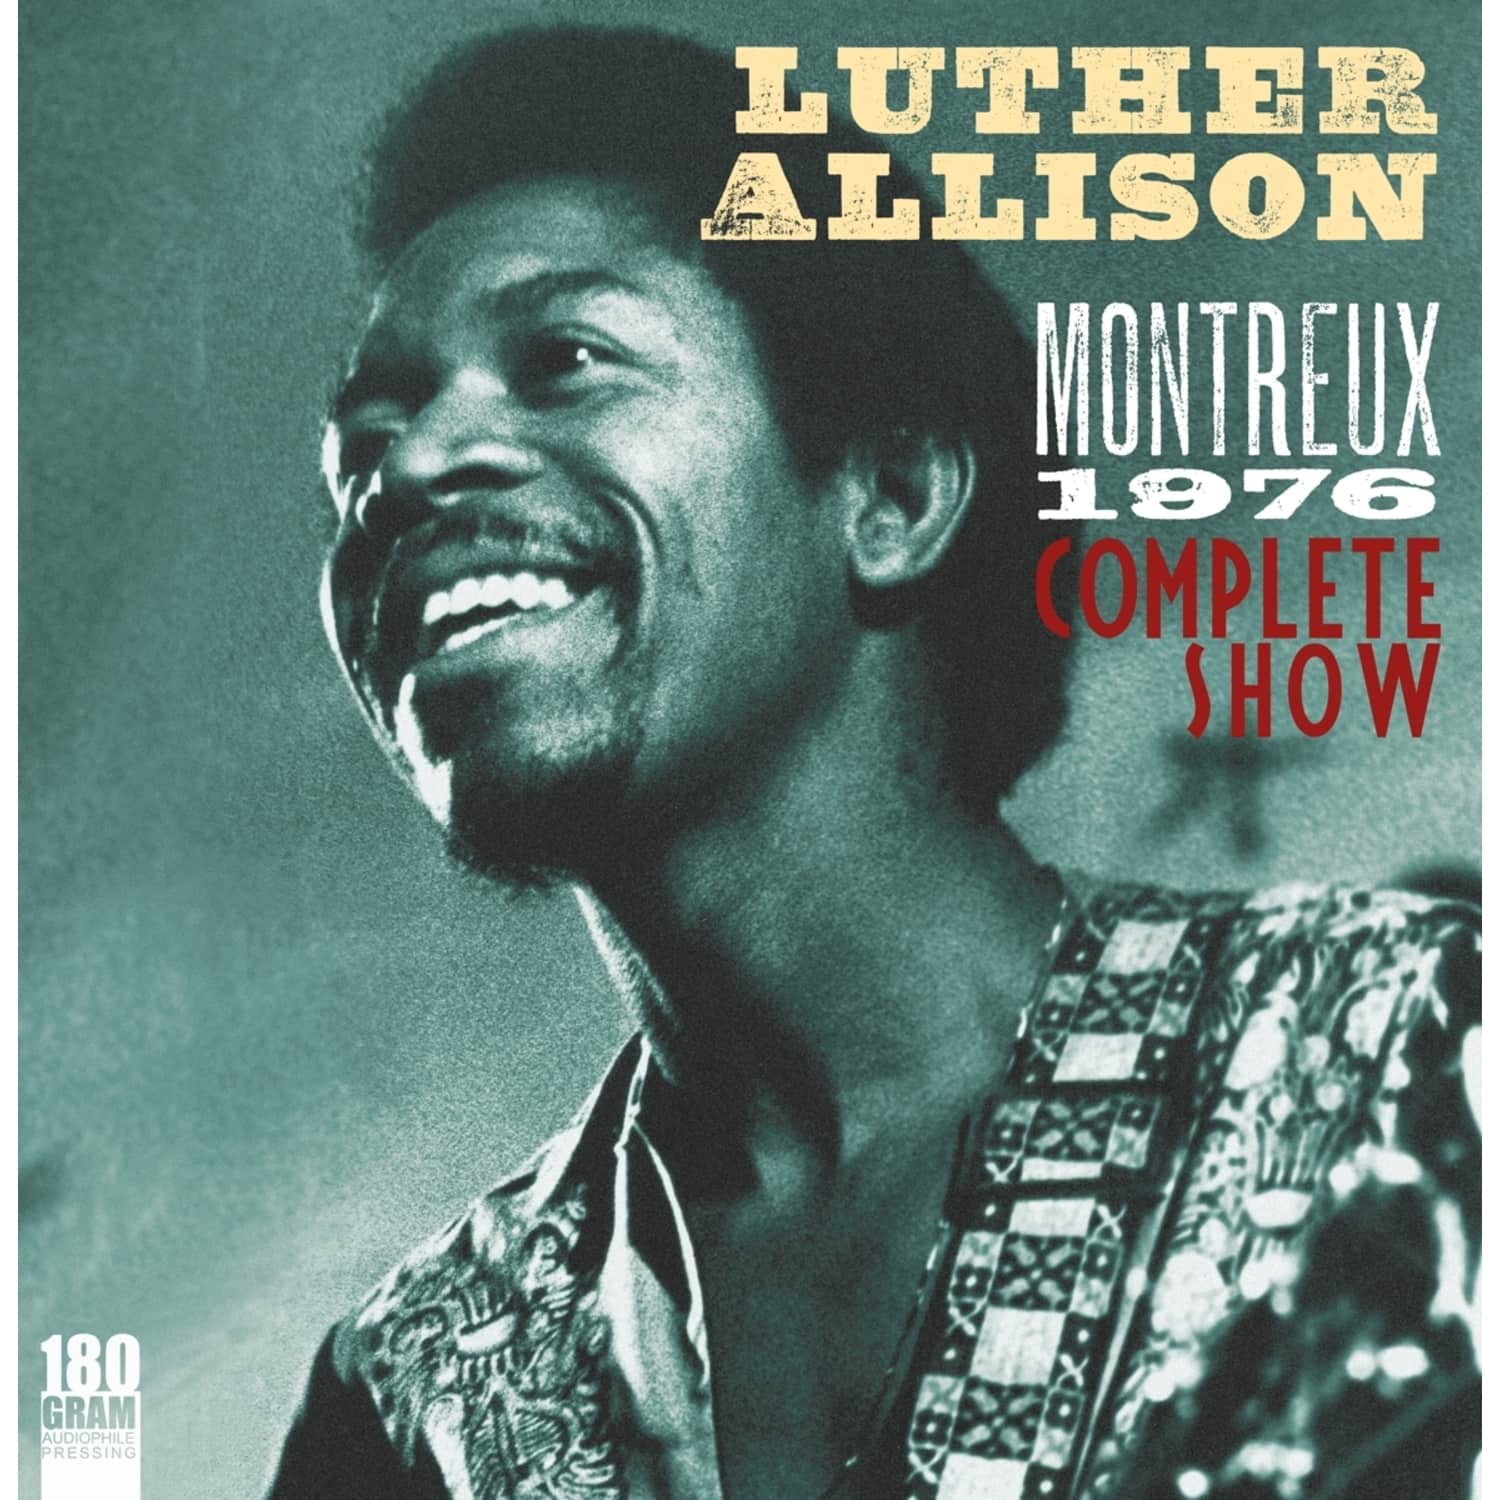 Luther Allison - MONTREUX 1976 